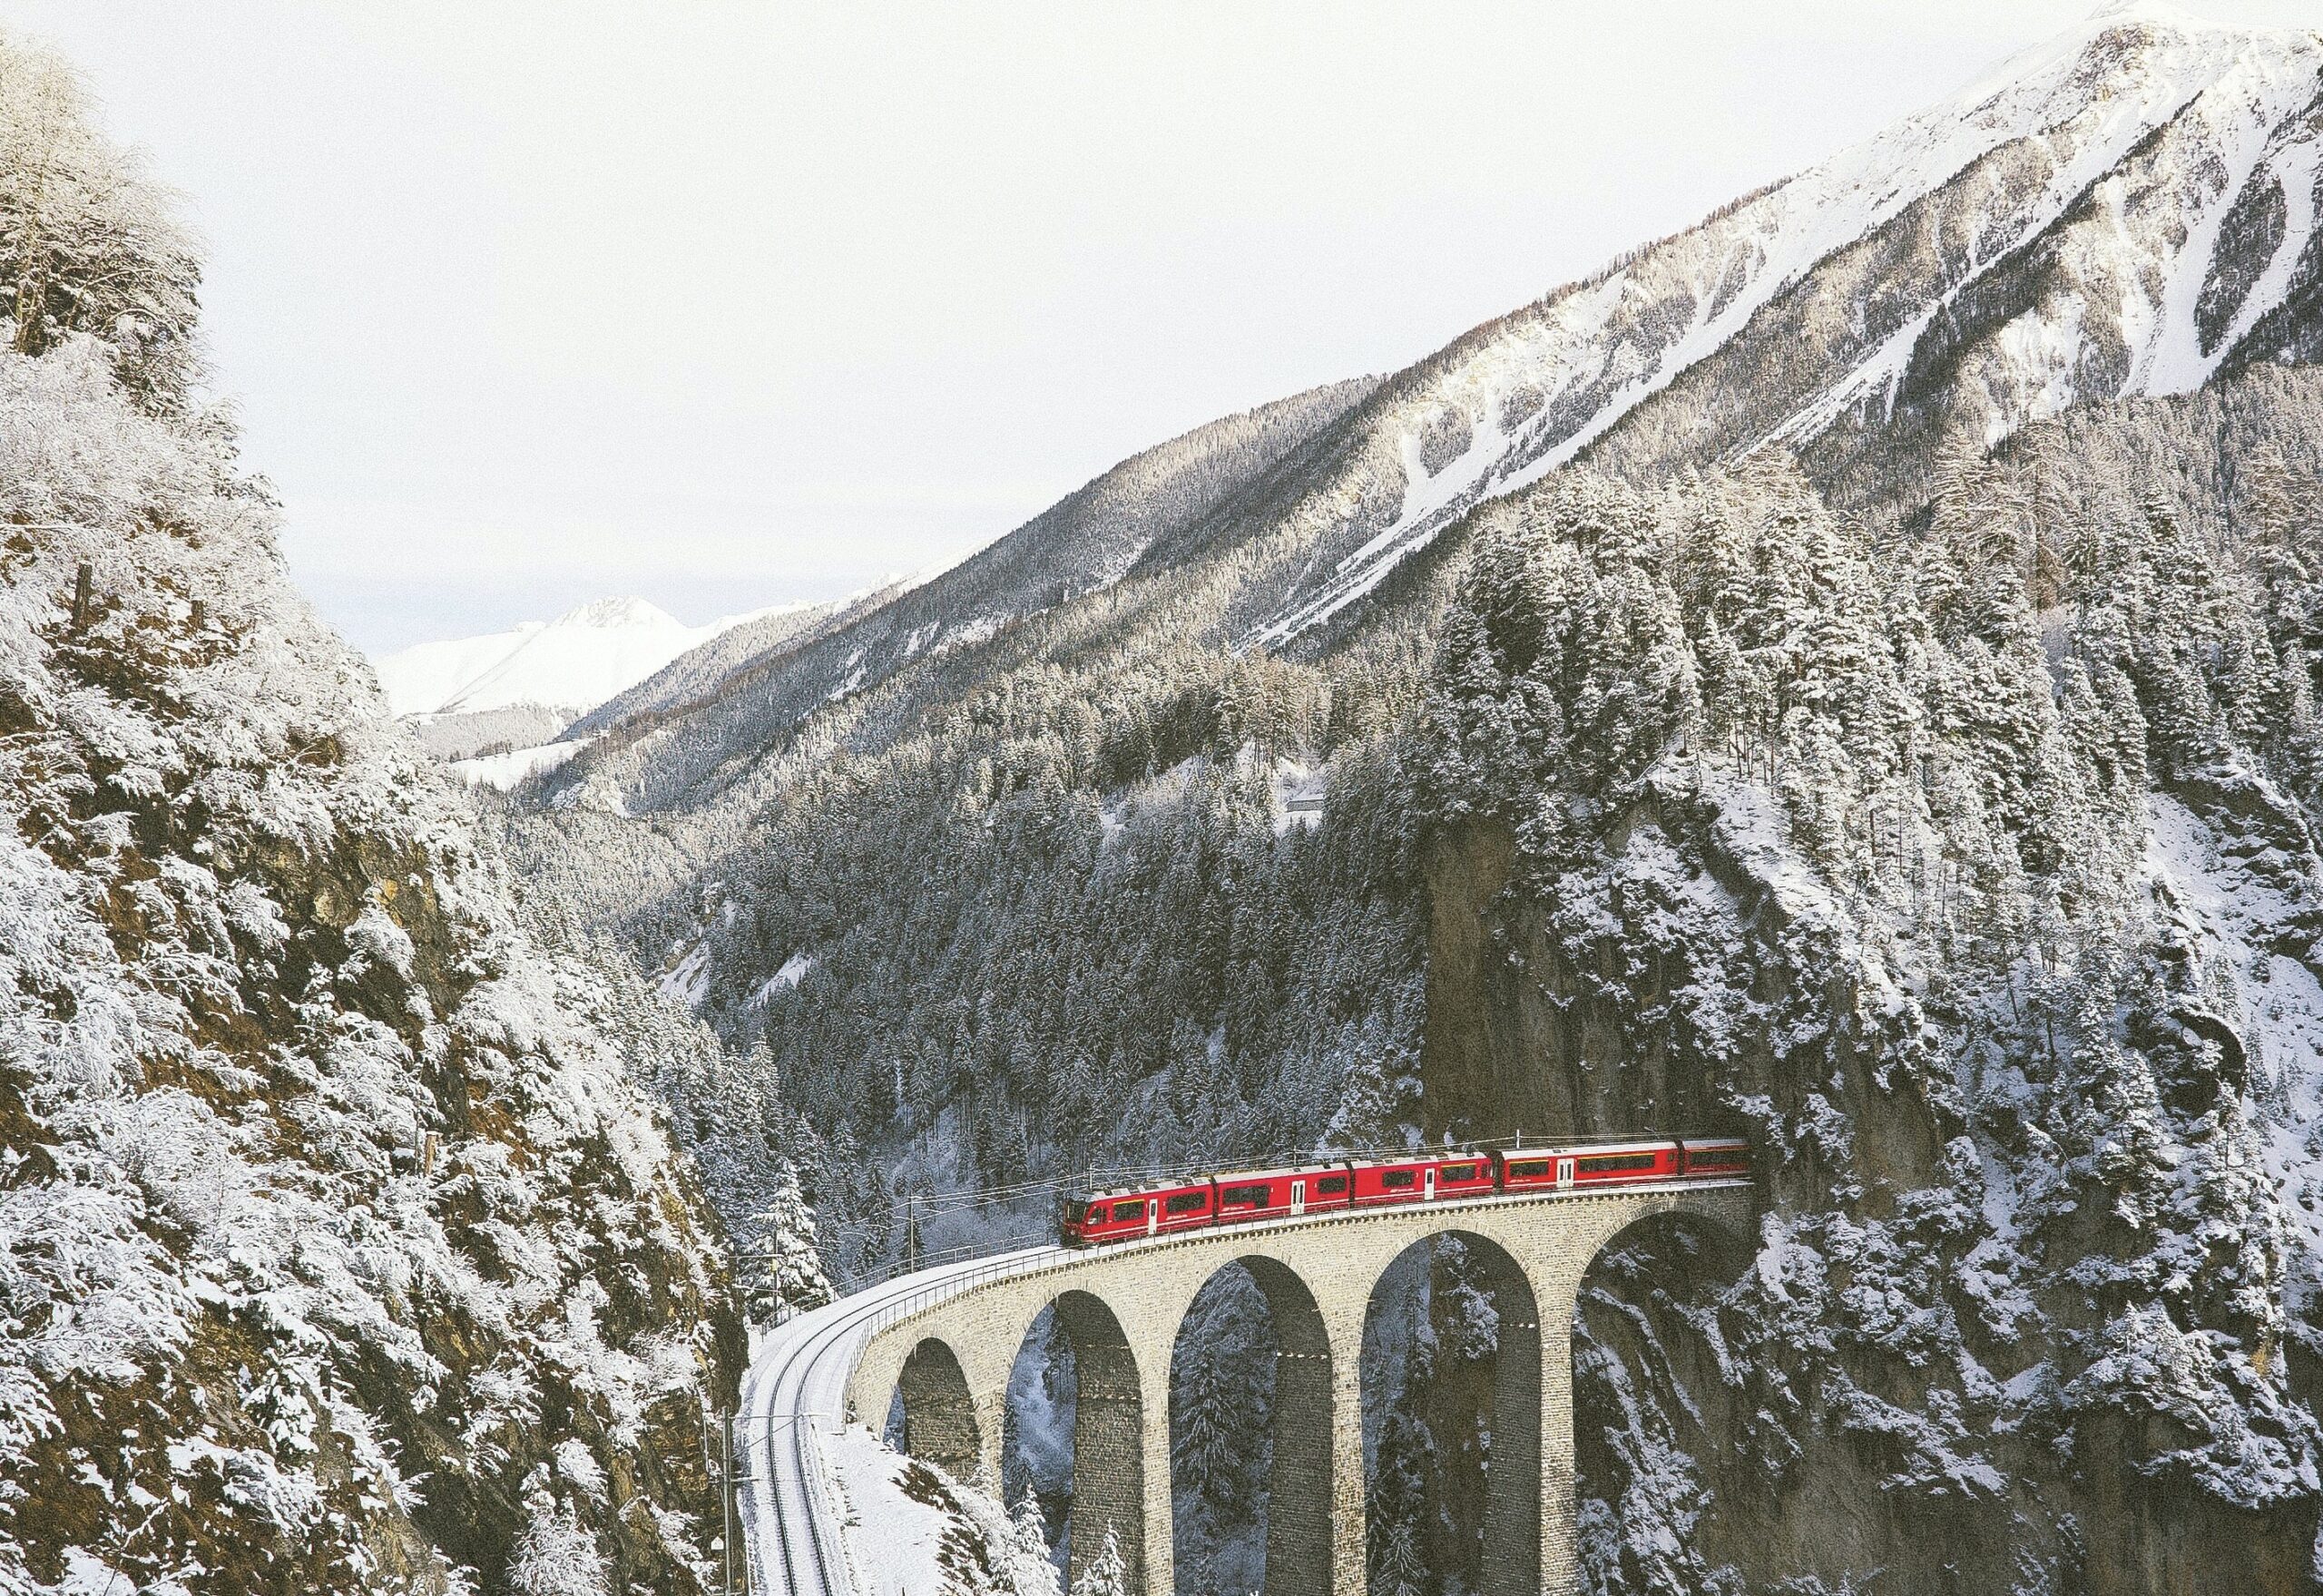 Switzerland is a dreamy winter vacation destination, especially in January. 
Pictured: the Switzerland train surrounded by snowy mountains 